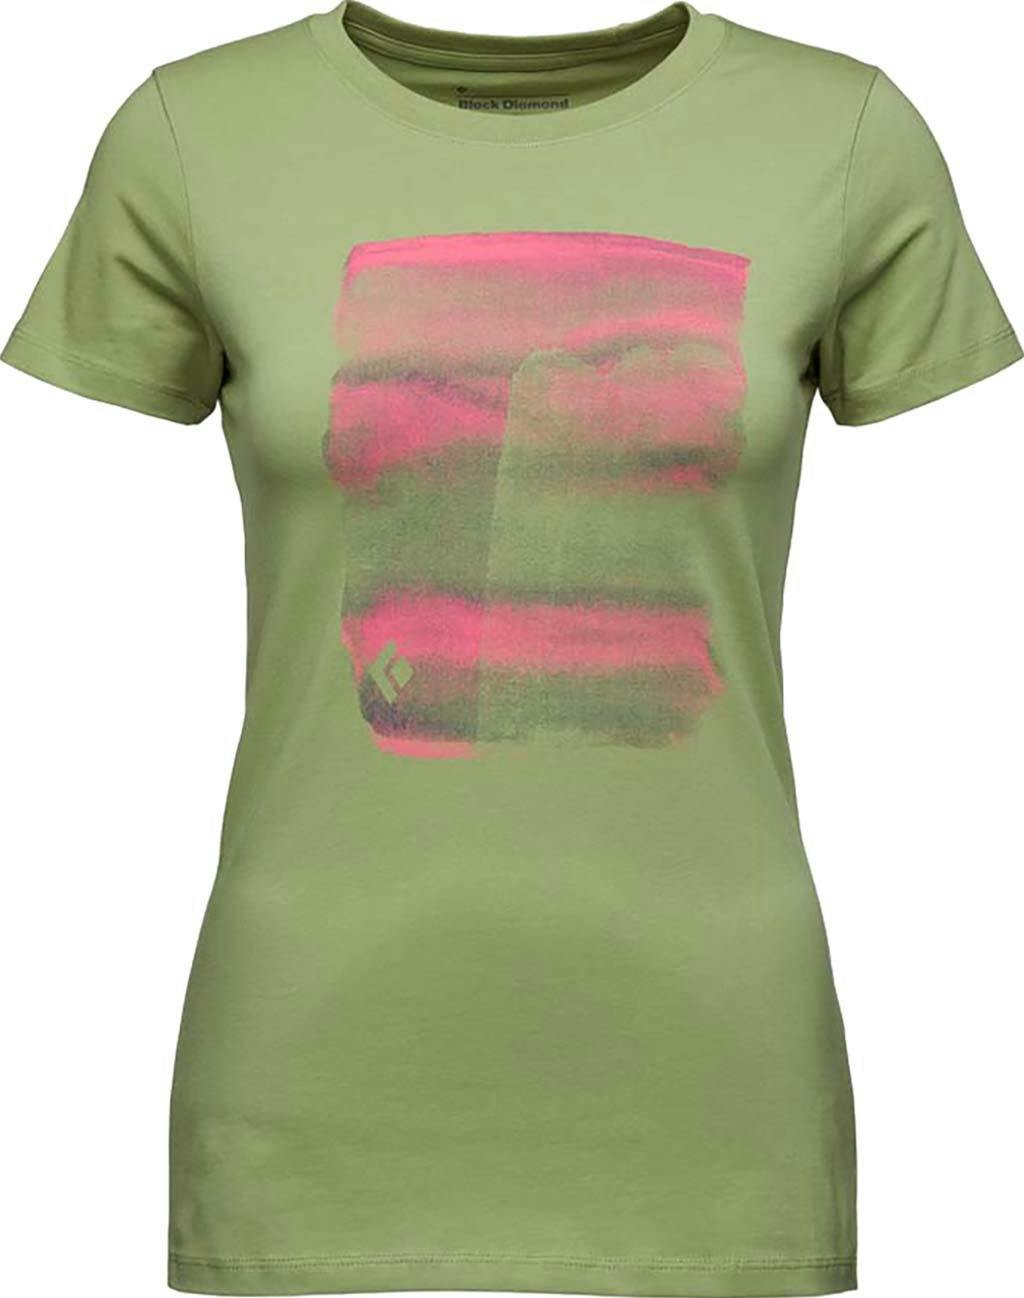 Product image for Big Wall Tee  - Women's